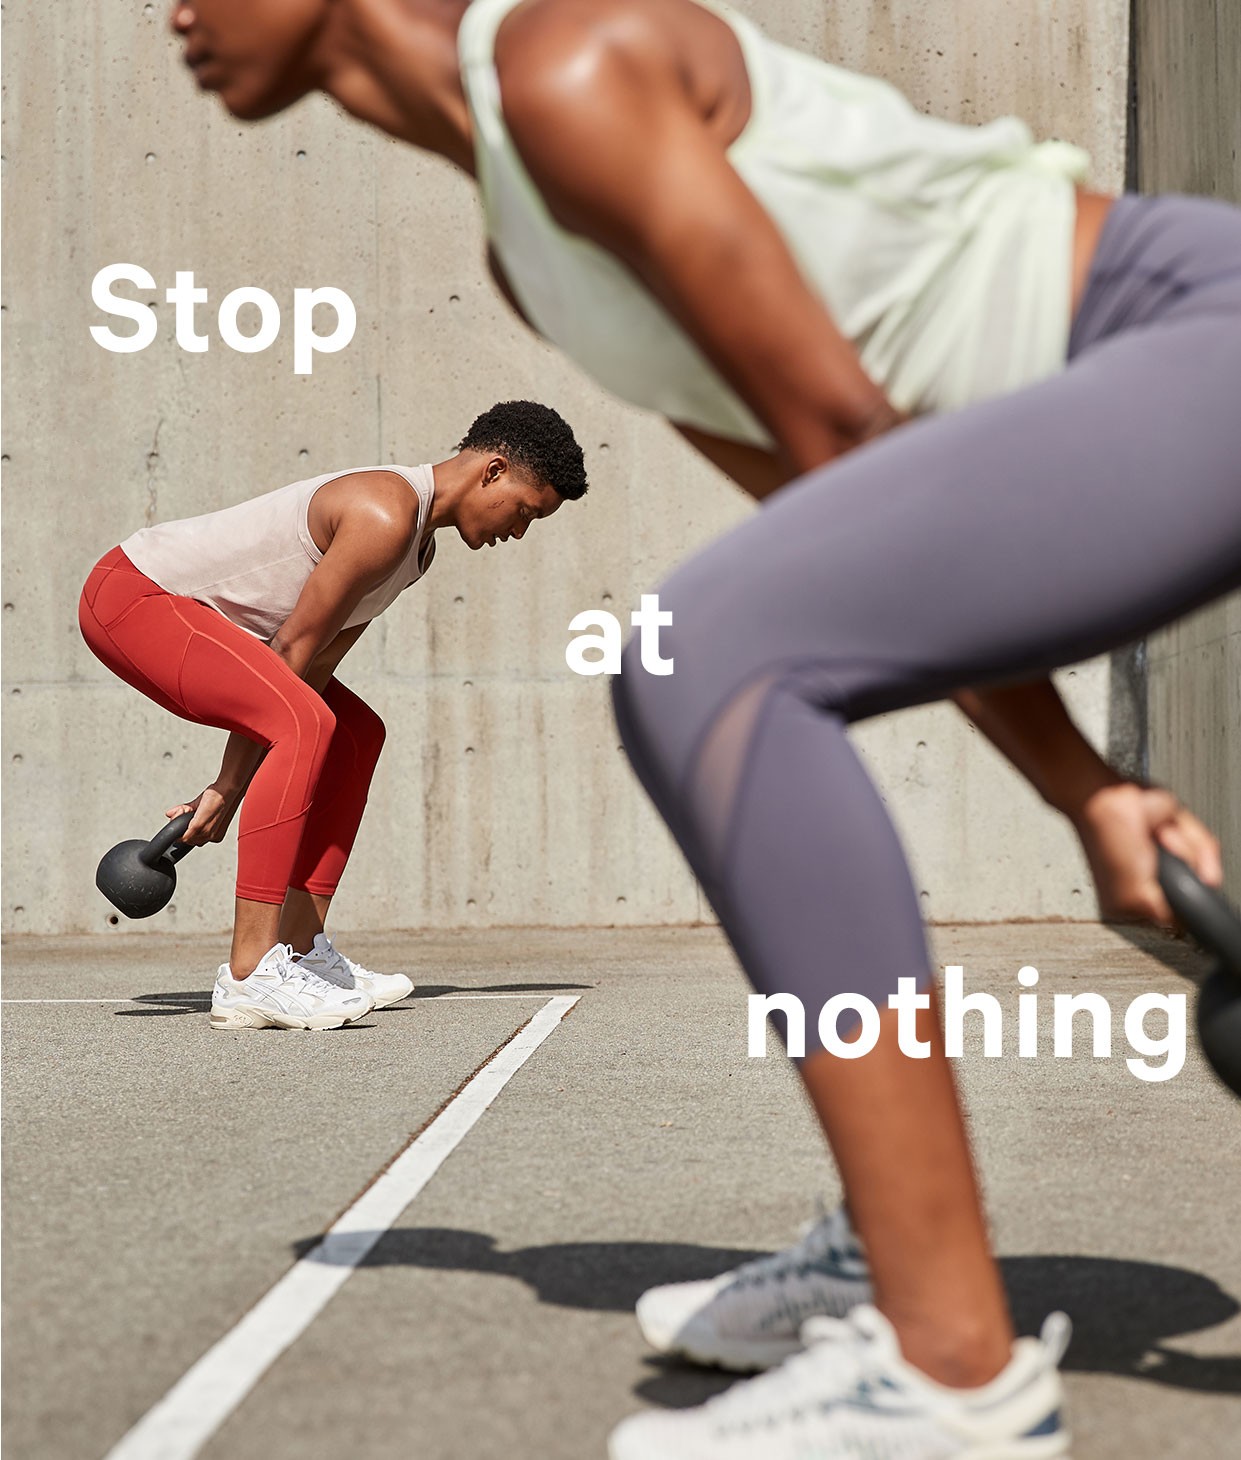 Stop at nothing.